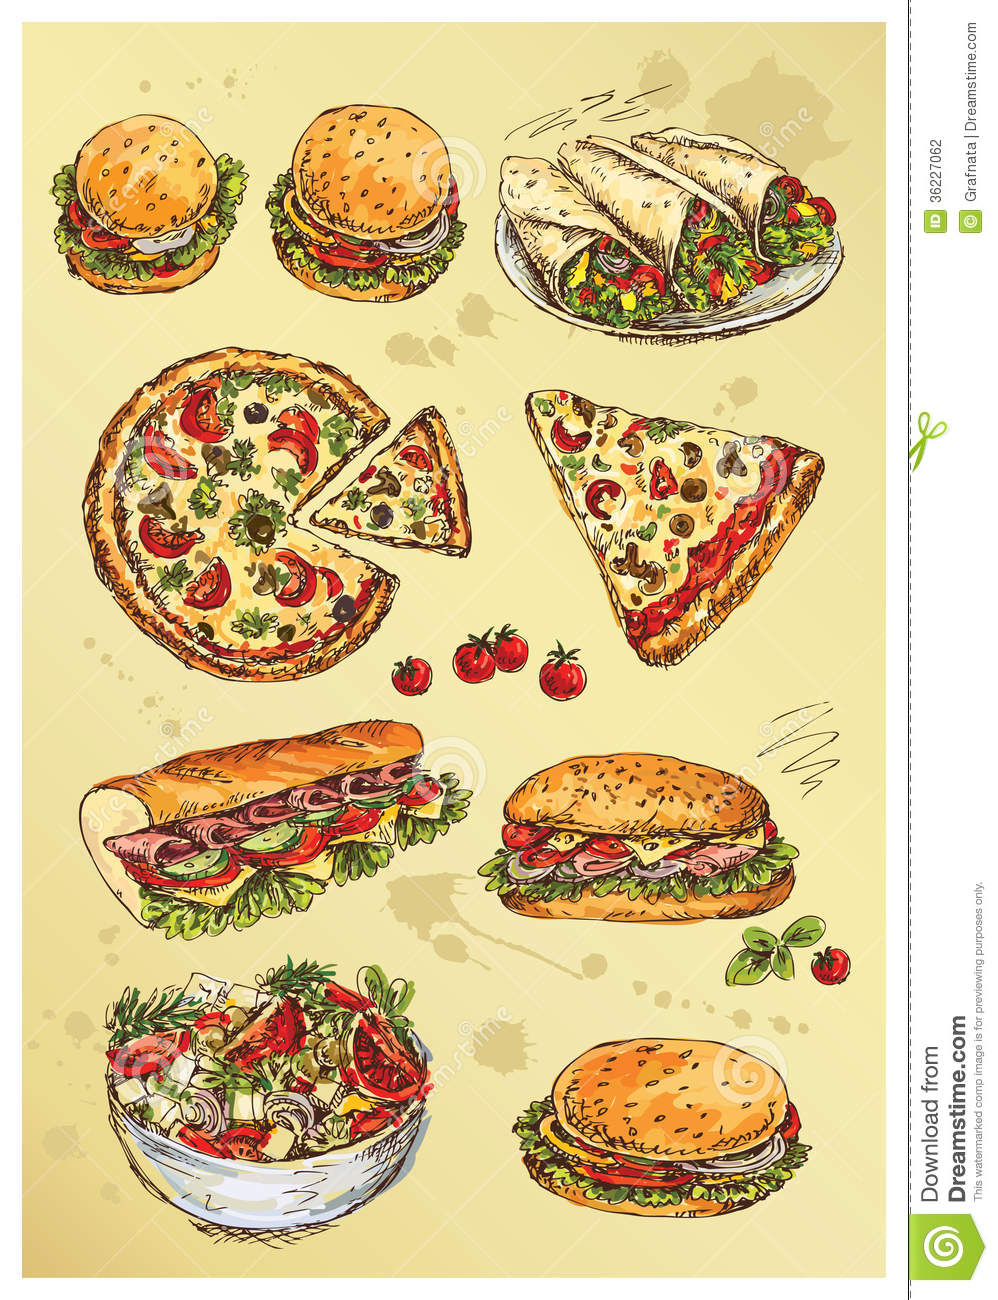 Hand Drawing Set Of Sandwiches Stock Photography   Image  36227062